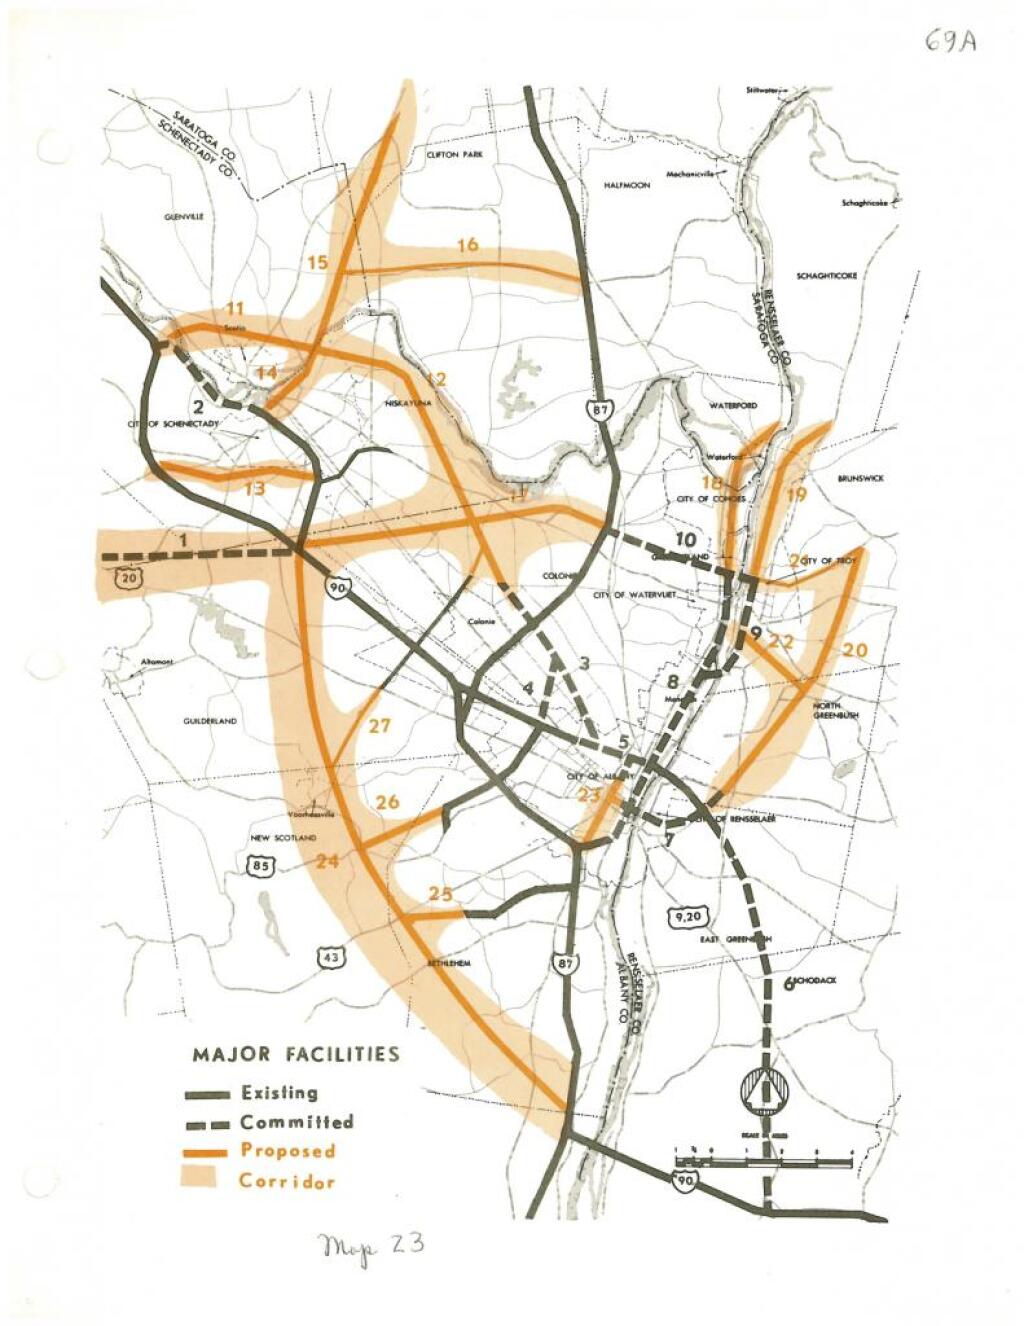 Proposed and Under Construction Capital Region Highways, 1969